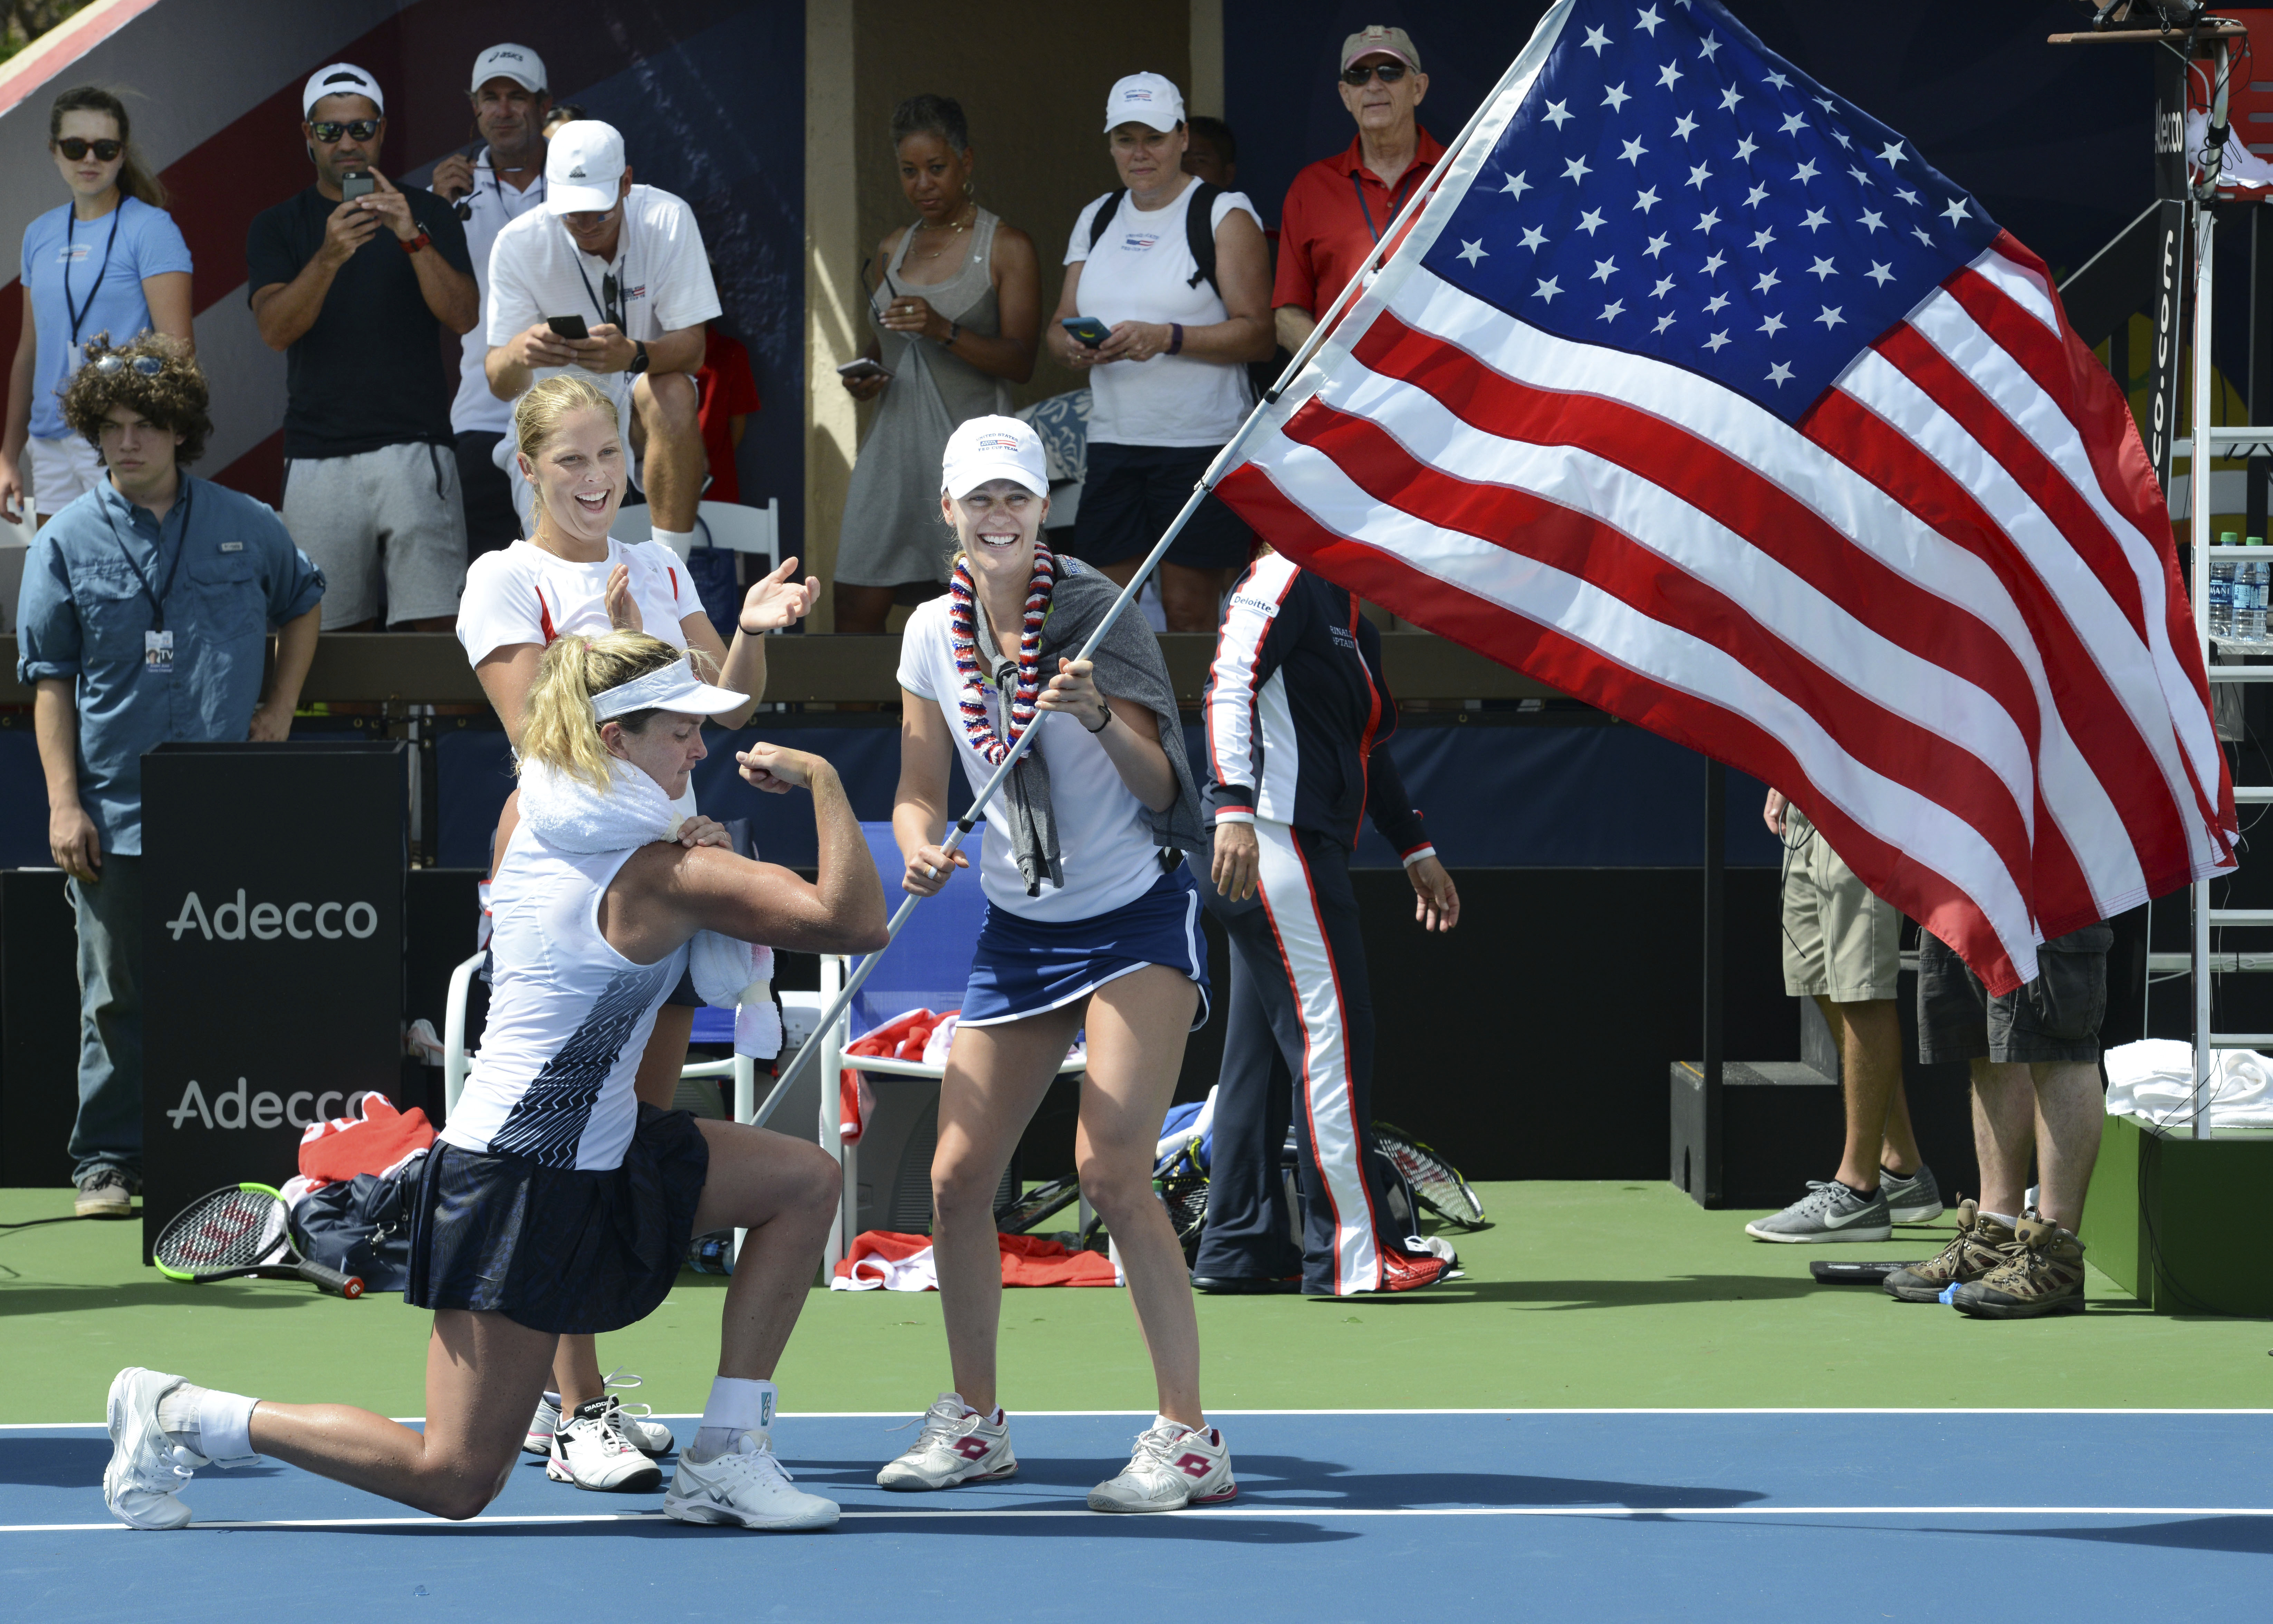 CoCo Vandeweghe flexes her muscles while celebrating with USA Fed Cup teammates Alison Riske, right, and Shelby Rogers after her singles win clinched the team victory over Germany at the Royal Lahaina Tennis Ranch in Lahaina, Hawaii on Sunday, Feb. 12, 2017. (Matthew Thayer/The Maui News via AP)